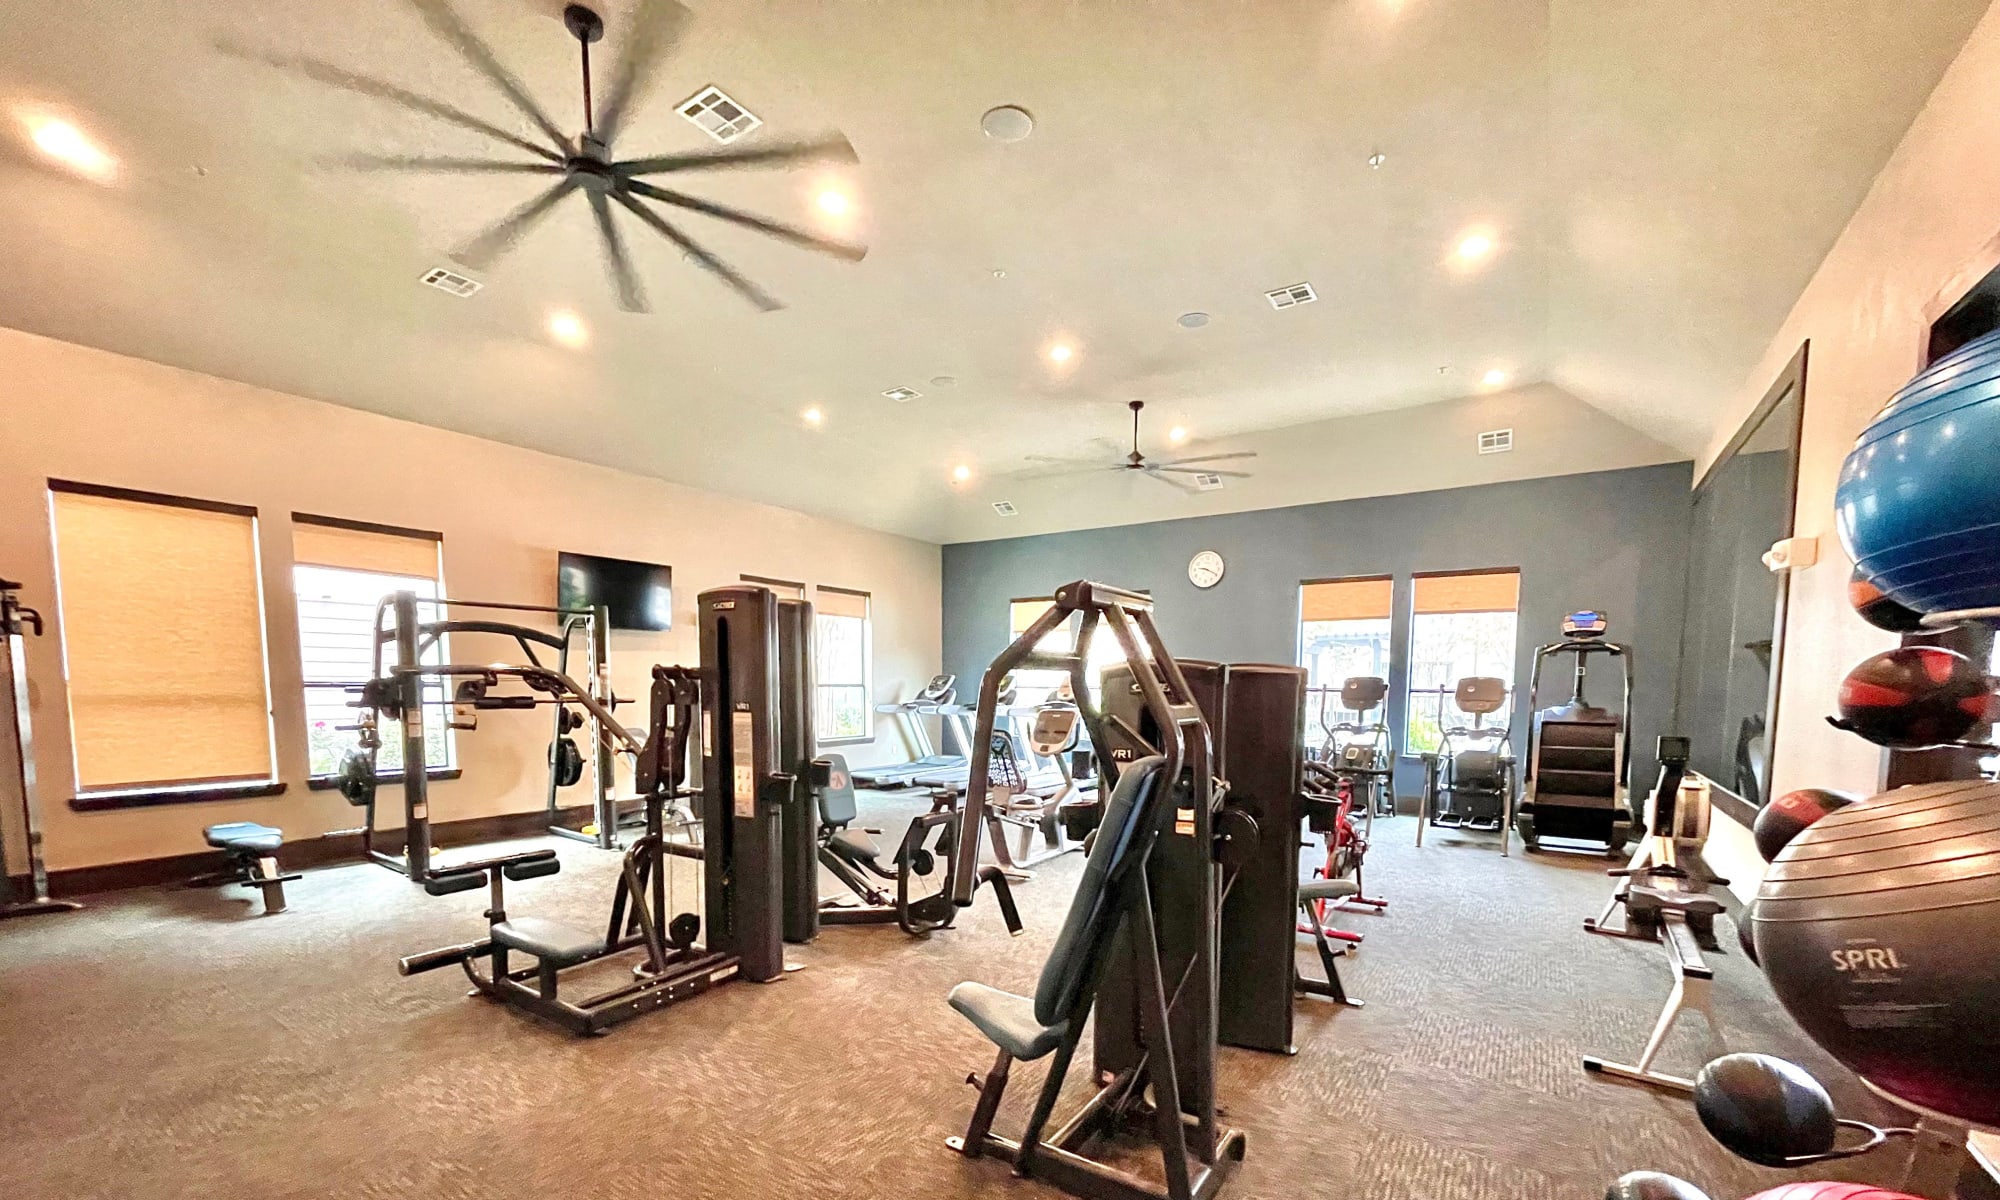 Enjoy apartments with a gym at The Abbey at Spring Town Center in Spring, Texas